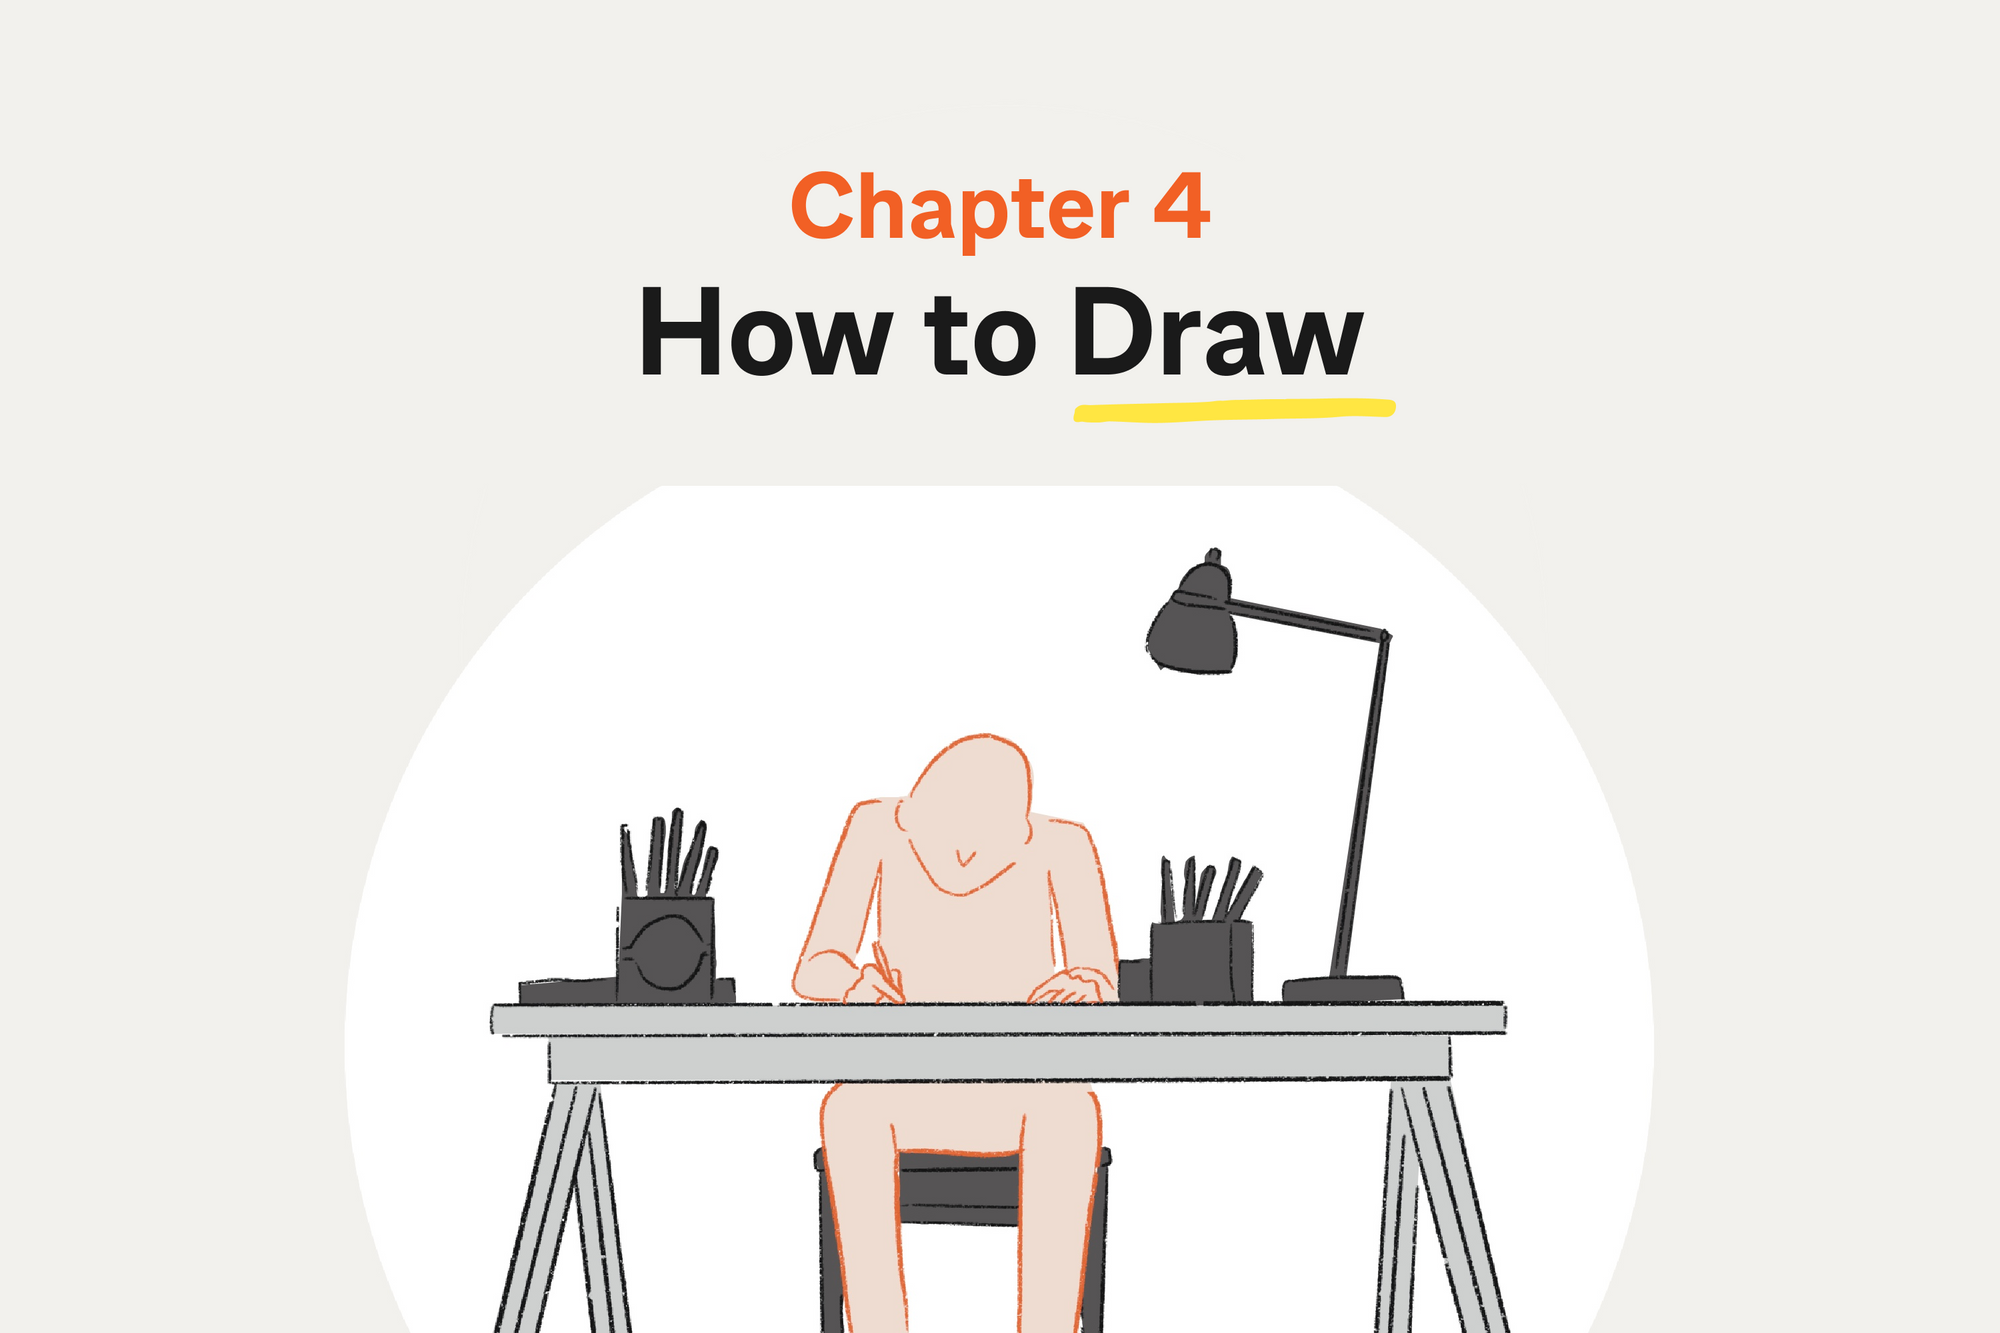 Chapter 4: How to Draw